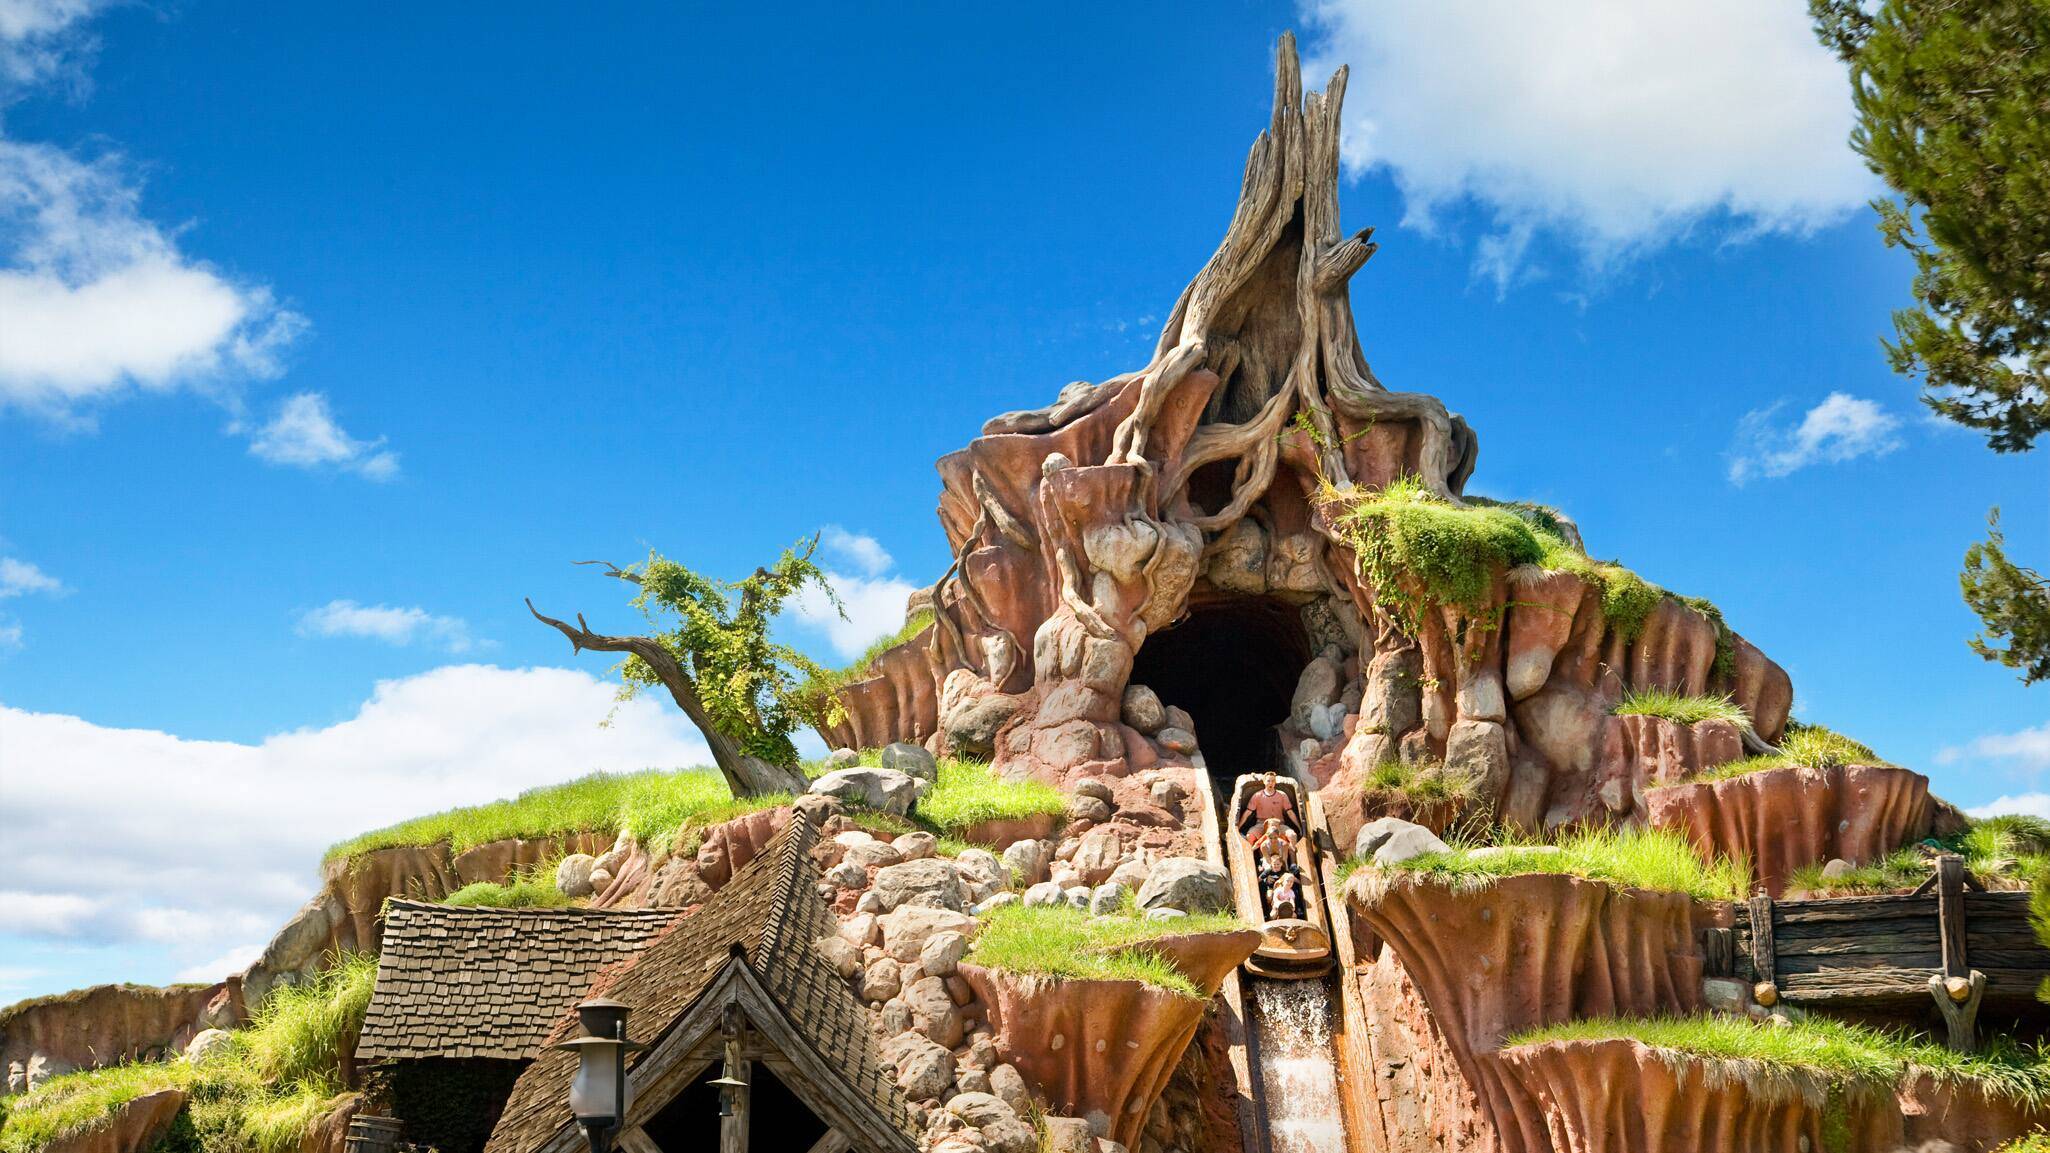 Disneyland's Splash Mountain to close in late May to begin the transformation into Tiana's Bayou Adventure